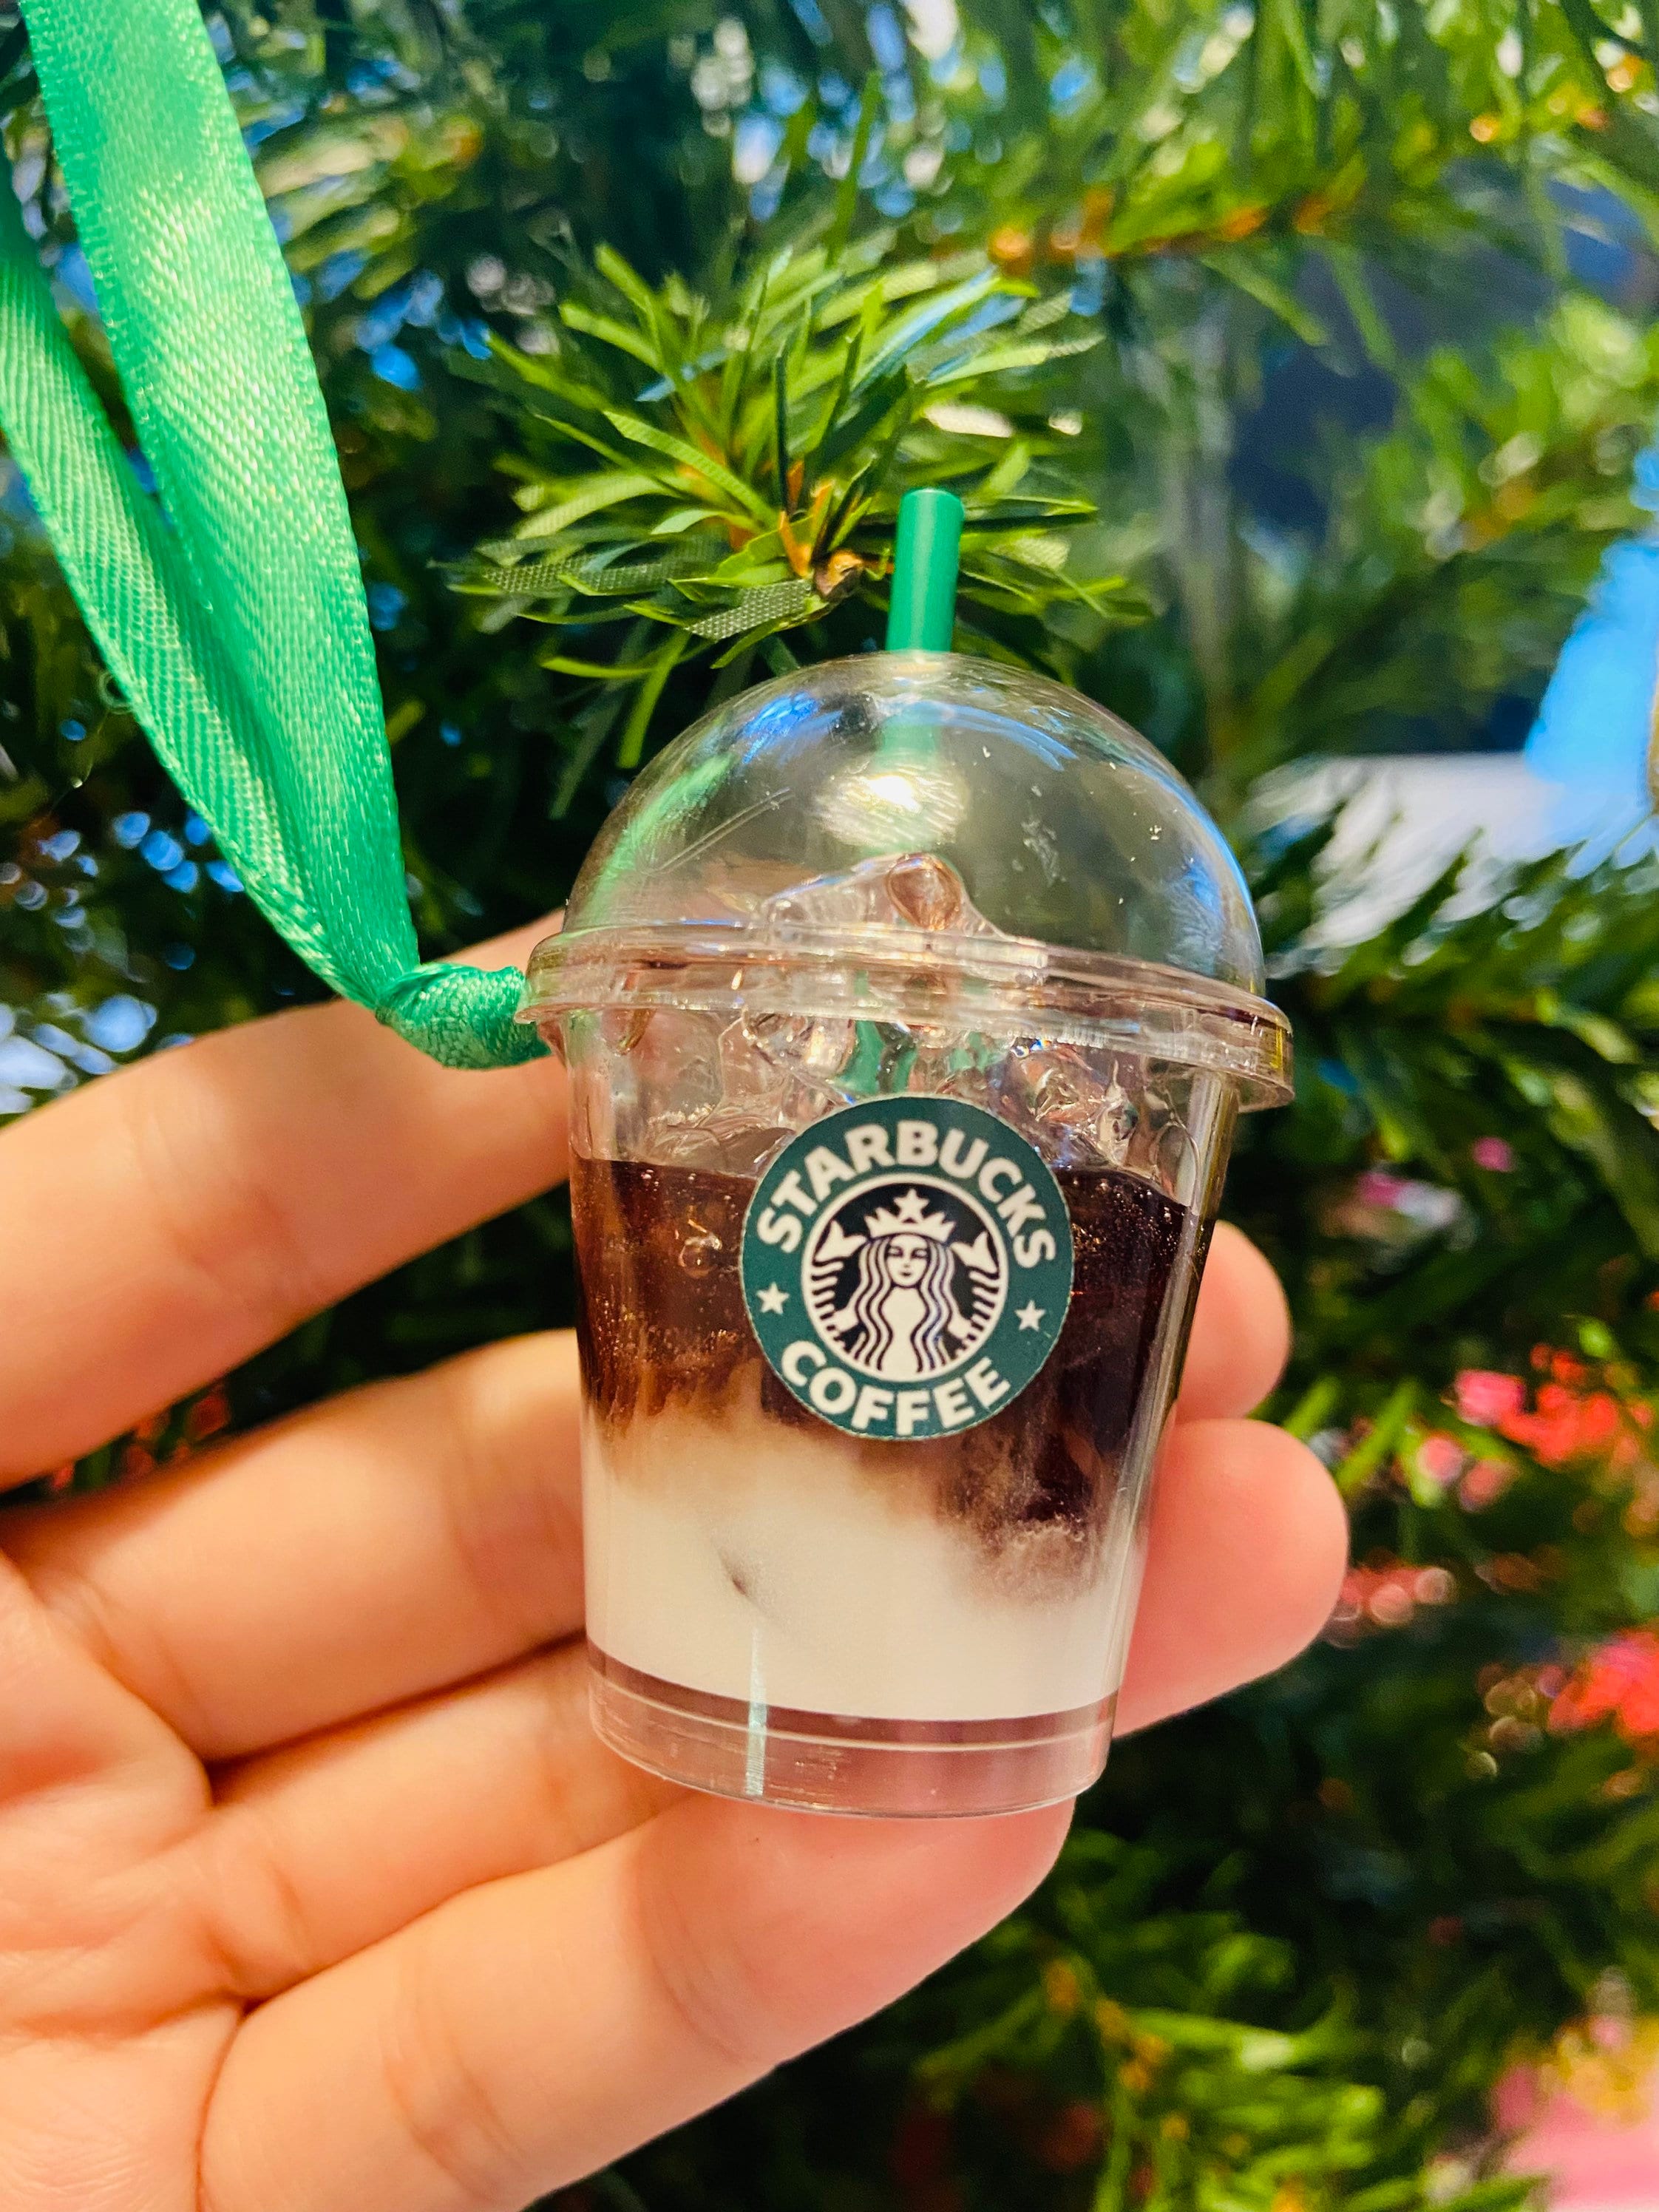 XSTPeach Miniature Drink, Personalized Starbucks Keychain, Deluxe, , 2.5Tall, Gift, Name Letter Keychain, Birthday Gift, Coffee Lover Gift